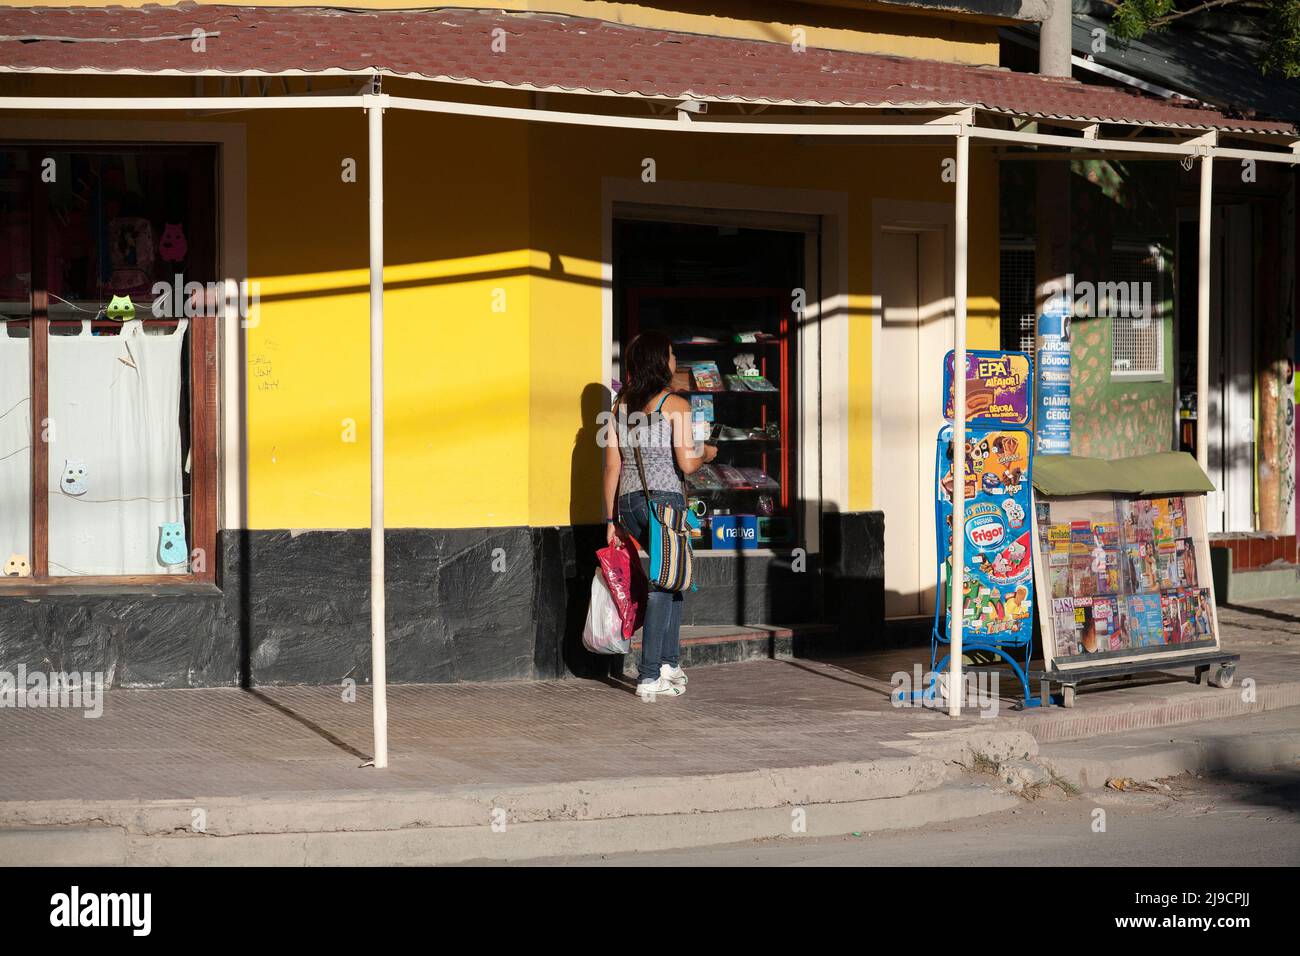 Street photography in Chos Malal, Argentina. Stock Photo